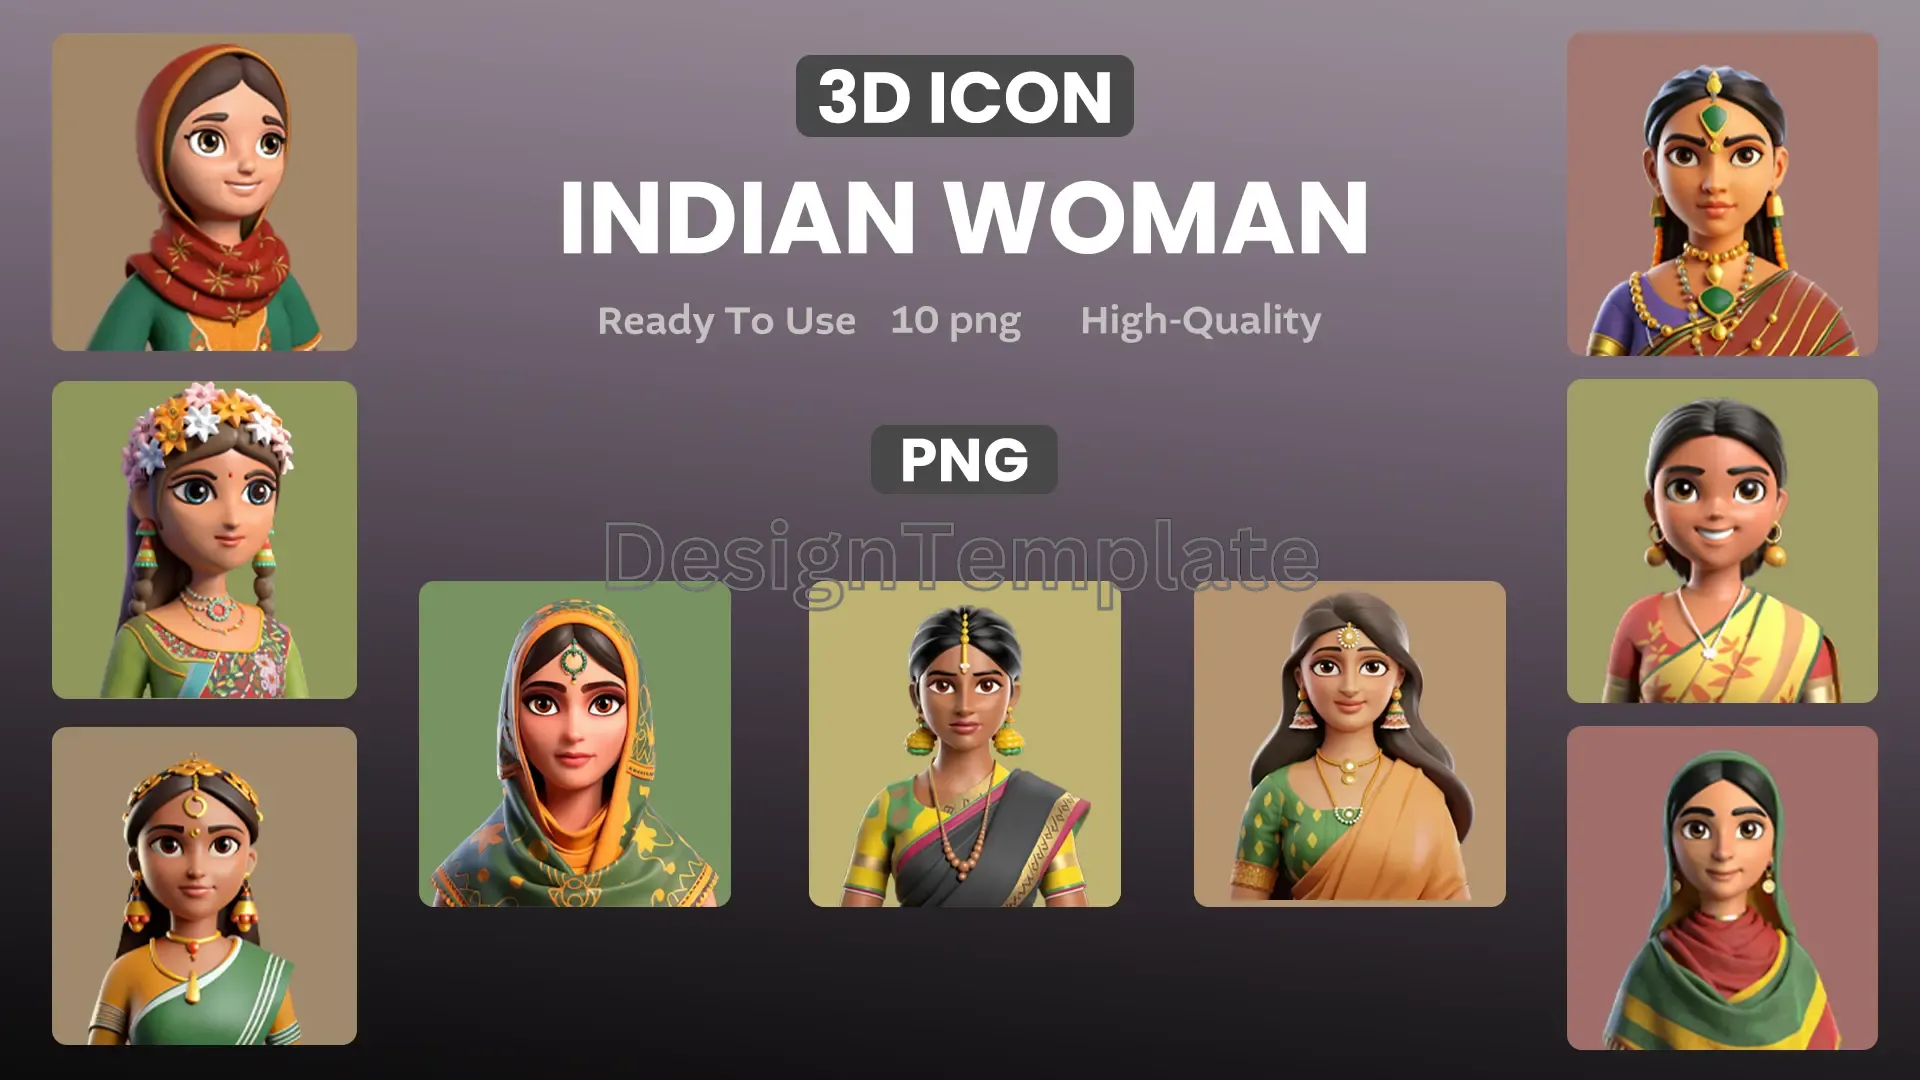 Traditional Indian Women 3D Design Elements image